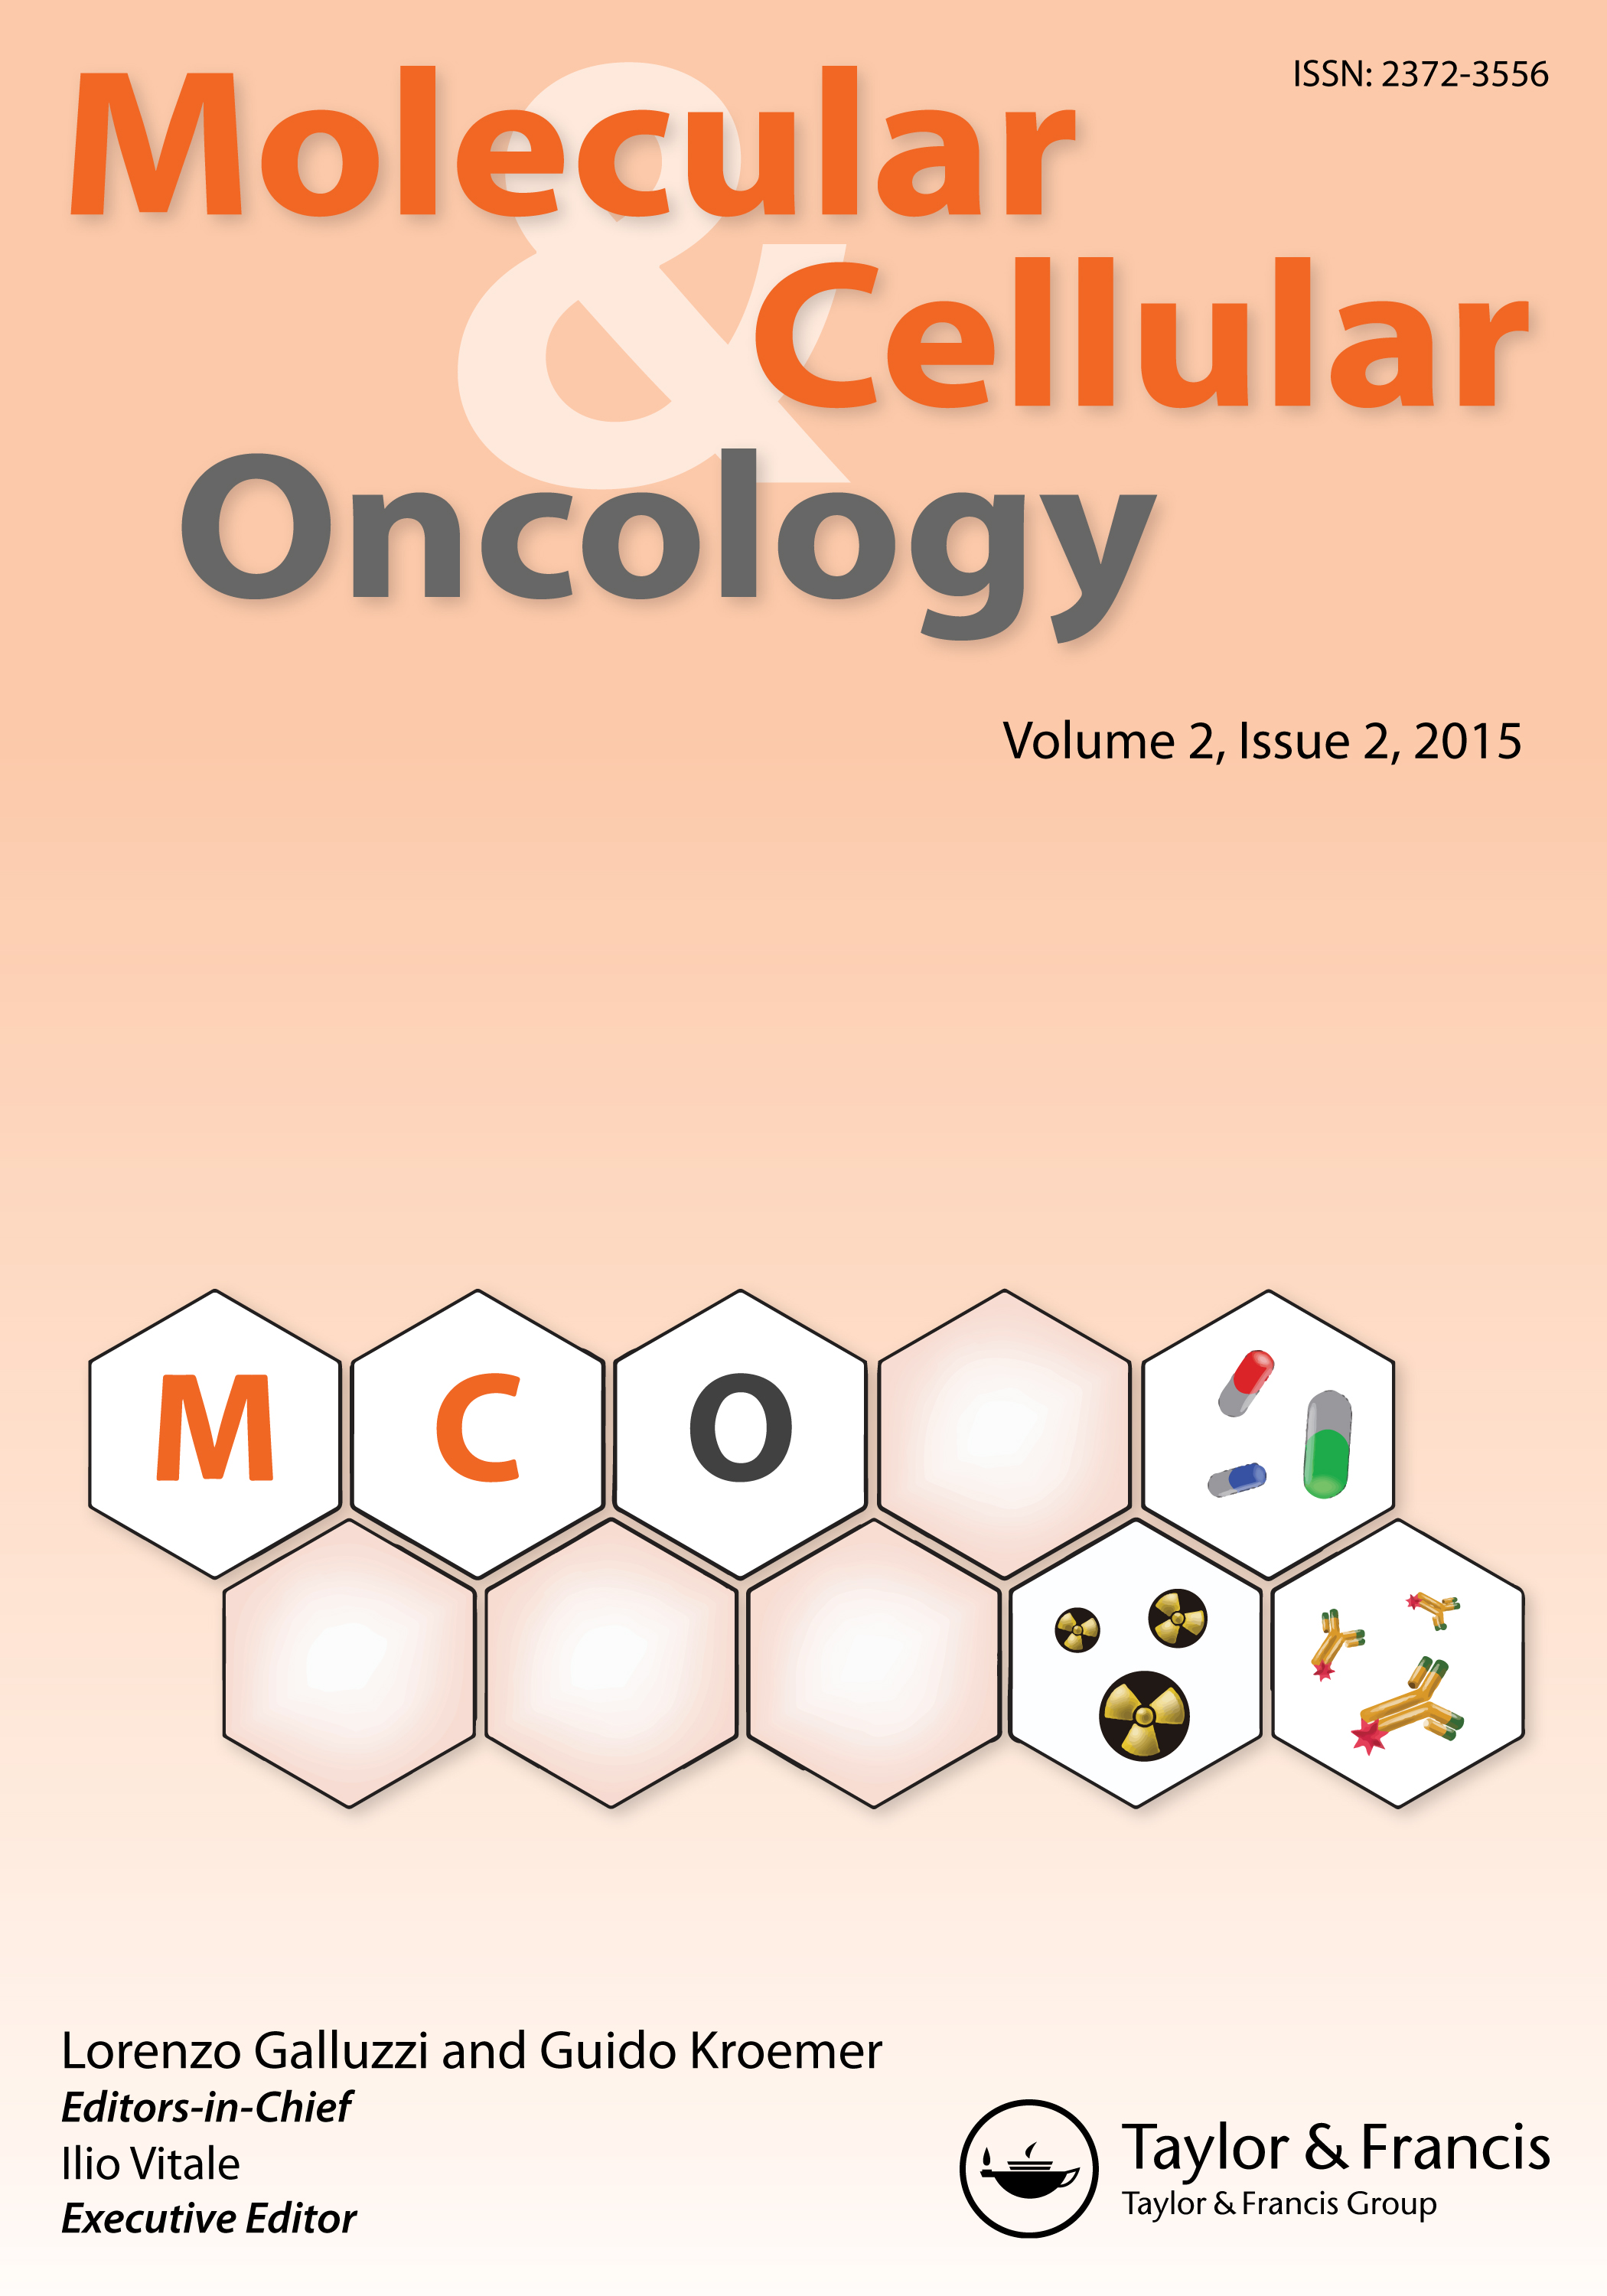 Cover image for Molecular & Cellular Oncology, Volume 1, Issue 4, 2014